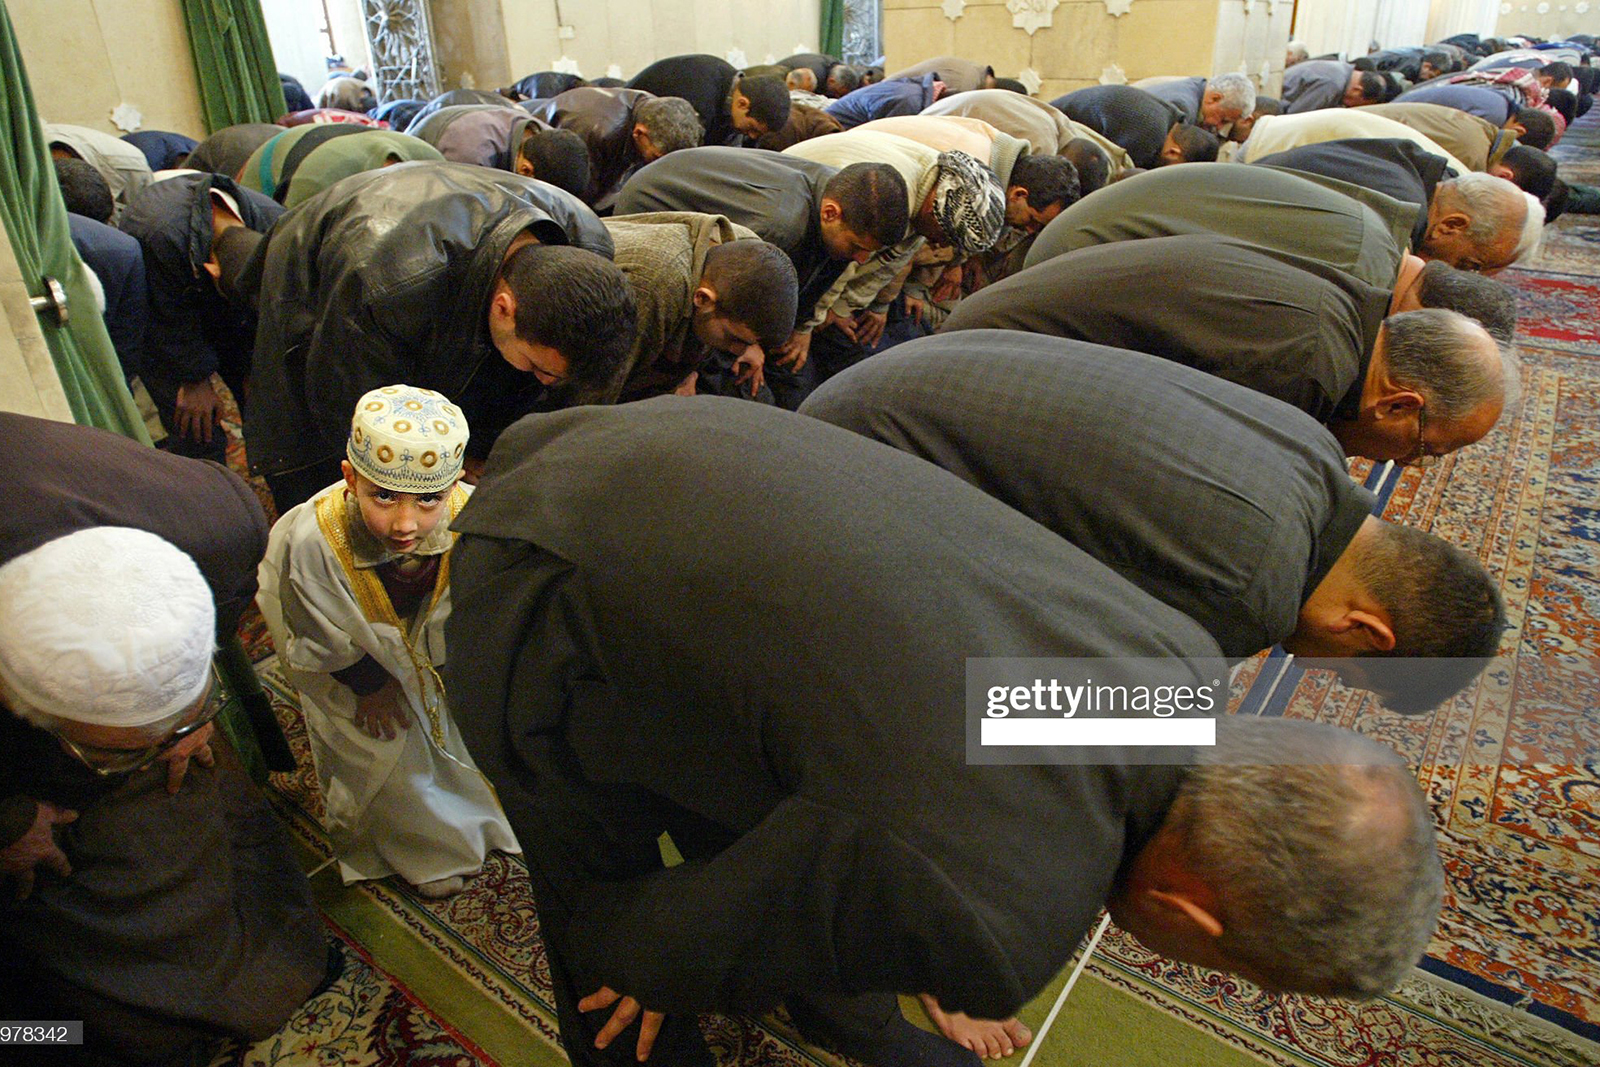 BAGHDAD, IRAQ:  An Iraqi Sunni boy, surrounded by older men, performs the Friday midday prayer at the Abu Hanifa mosque in Baghdad's Sunni neighborhood of Azamiya13 February 2004. The top UN envoy to Iraq, Lakhar Brahimi, said in a meeting with the Iraqi Governing Council that the timing of elections in the war-torn country should not be tied to a specific deadline, but that the timing should flexible to allow for good preparations.  AFP PHOTO/ Daniel MIHAILESCU  (Photo credit should read DANIEL MIHAILESCU/AFP via Getty Images)